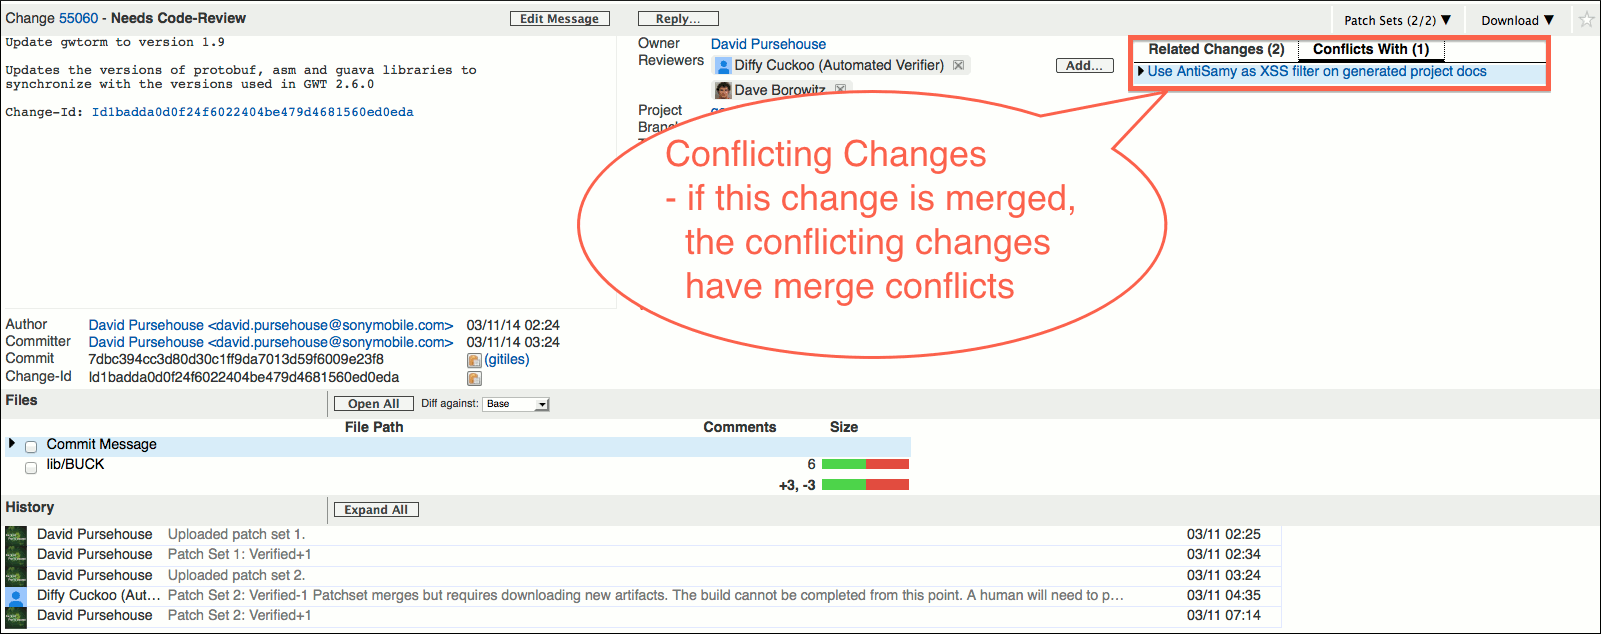 user review ui change screen conflicts with